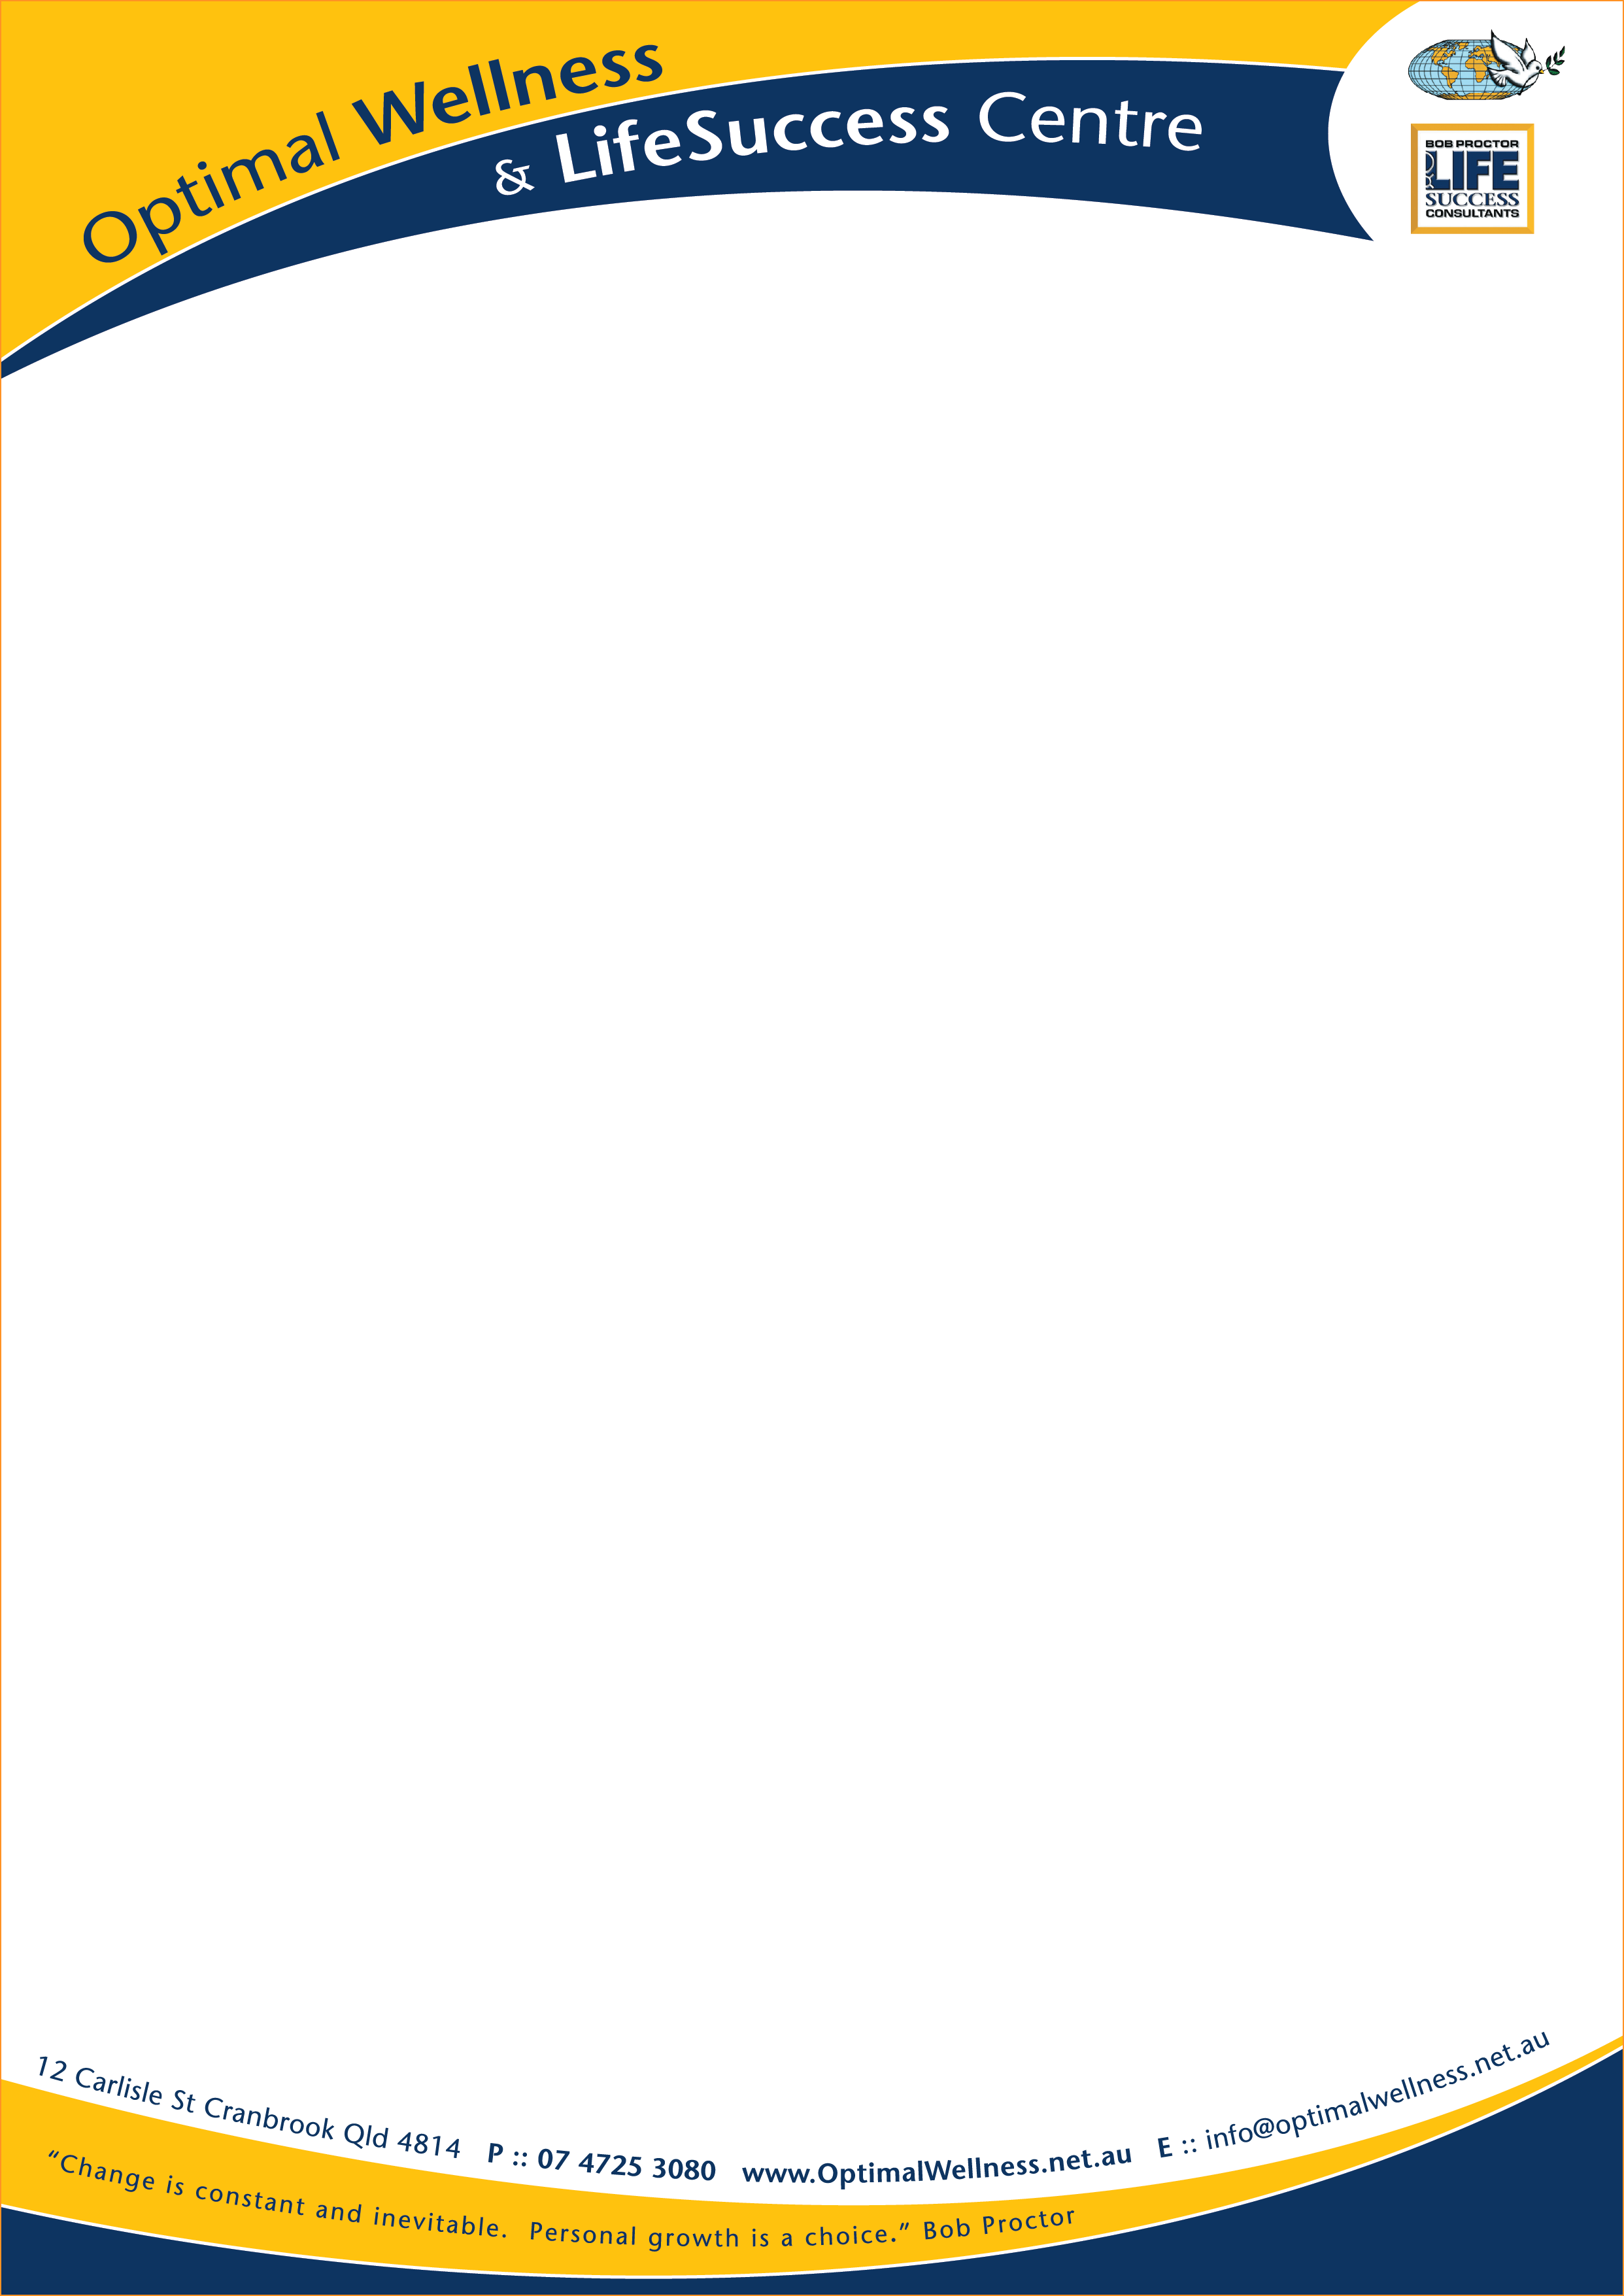 Letterheads Examples.opwc Letterhead 01.png - Letterhead, Transparent background PNG HD thumbnail